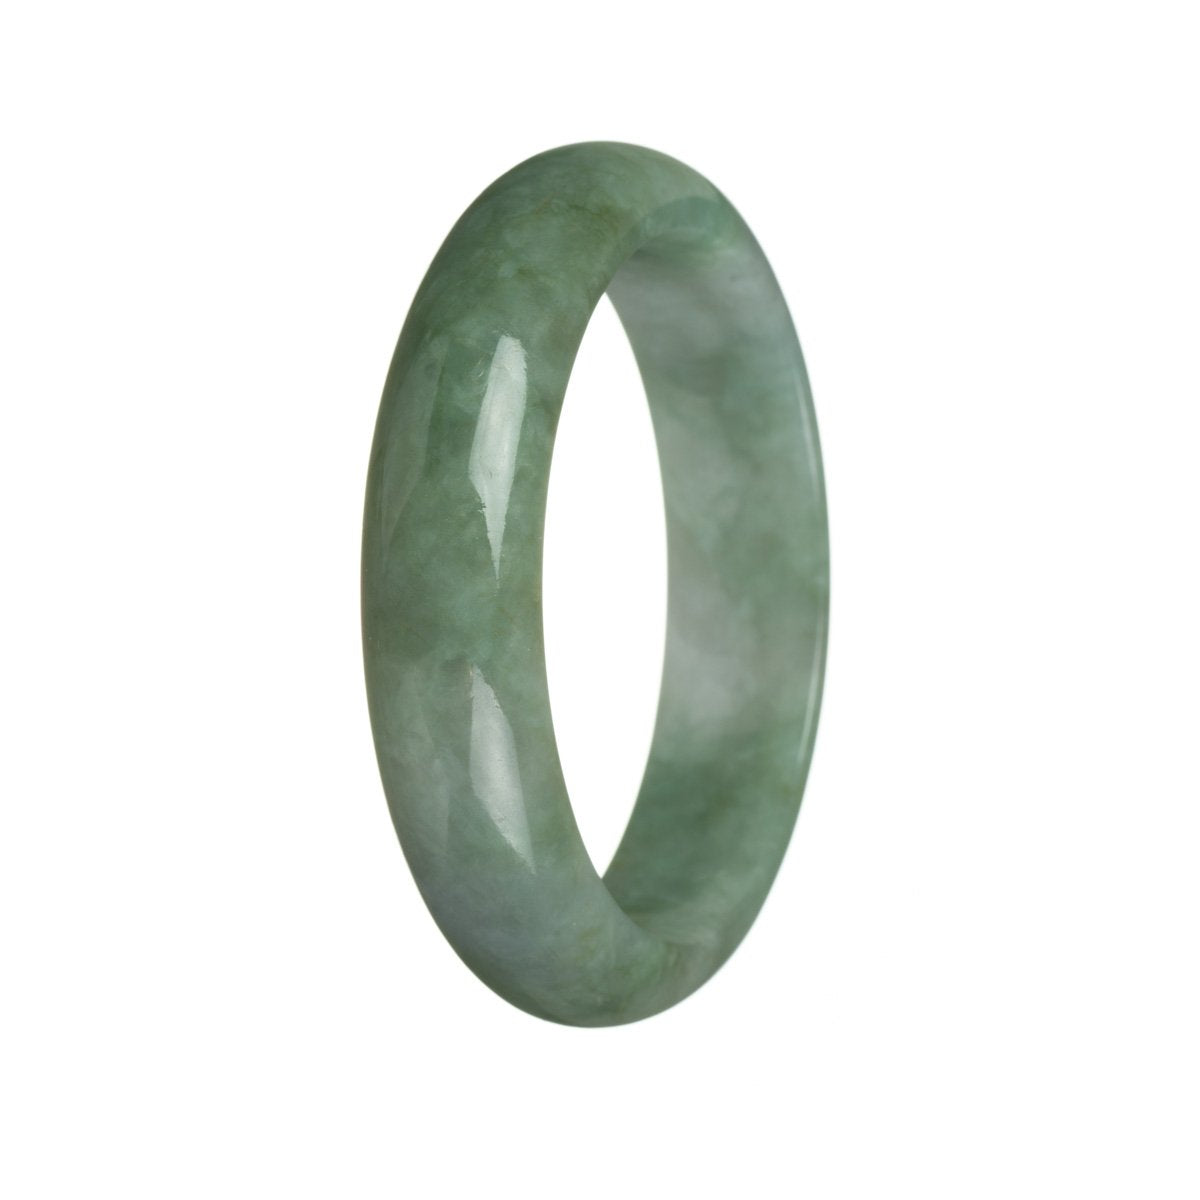 A half-moon shaped green jadeite bangle, crafted from genuine natural jadeite.